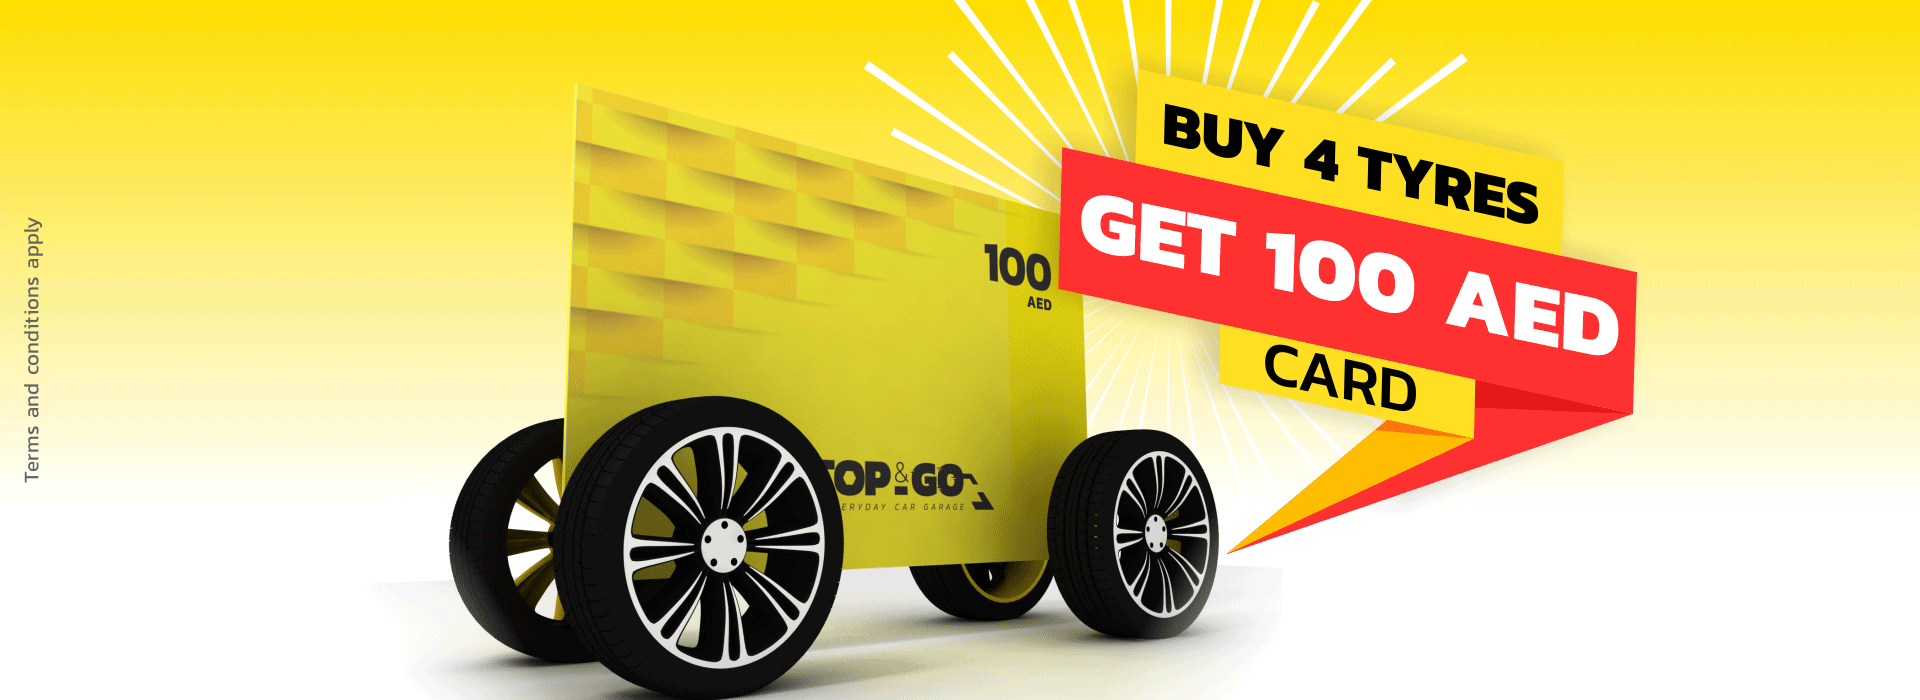 Get AED 100 Gift Card for the Next Visit at Stop&Go